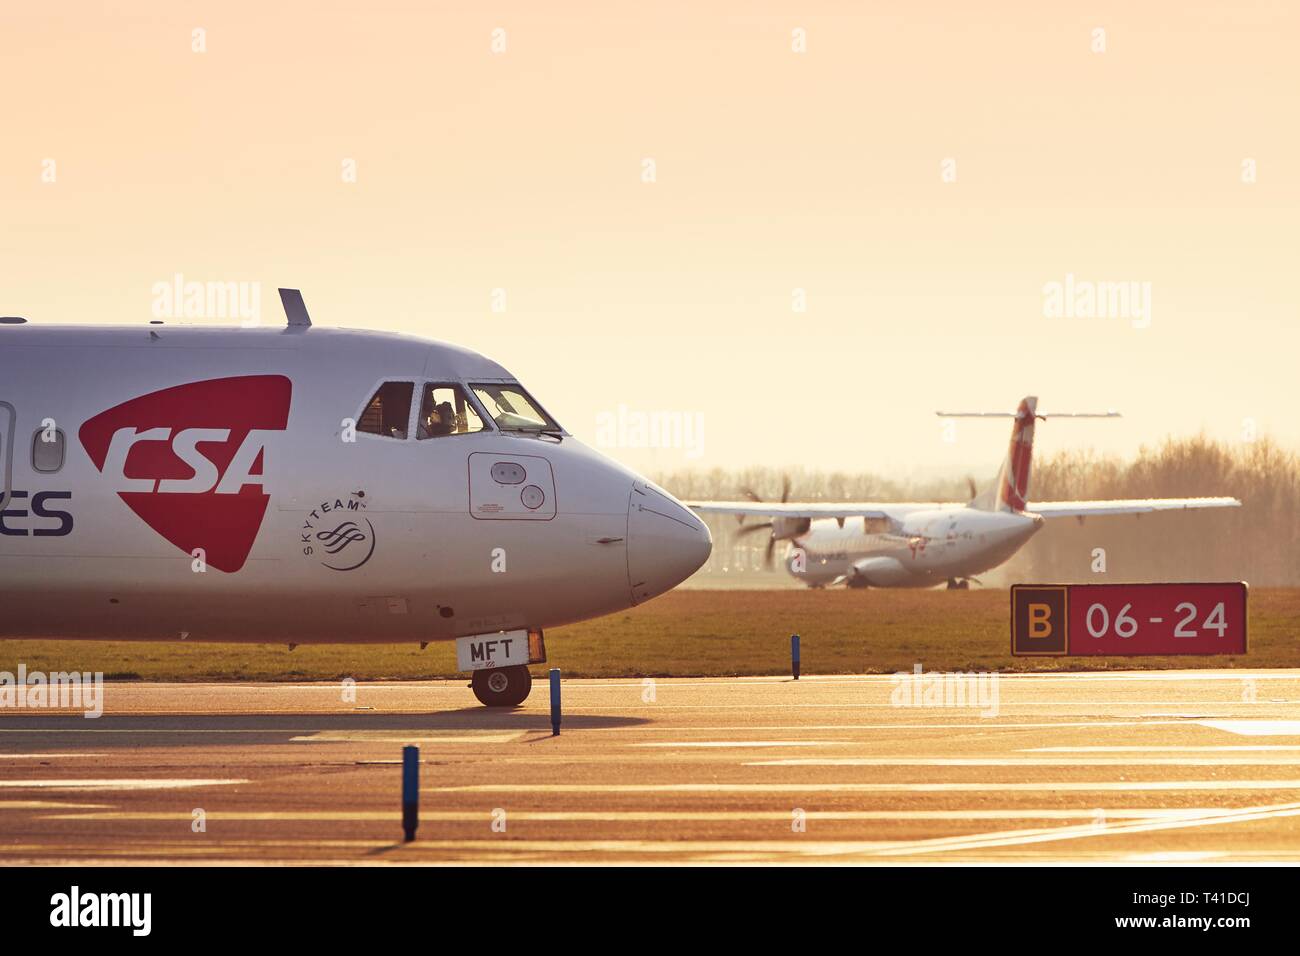 Prague, Czech Republic - March 29, 2019: Two turboprop airplanes ATR-72 of Czech Airlines (CSA) before take off from Vaclav Havel Airport Prague on Ma Stock Photo